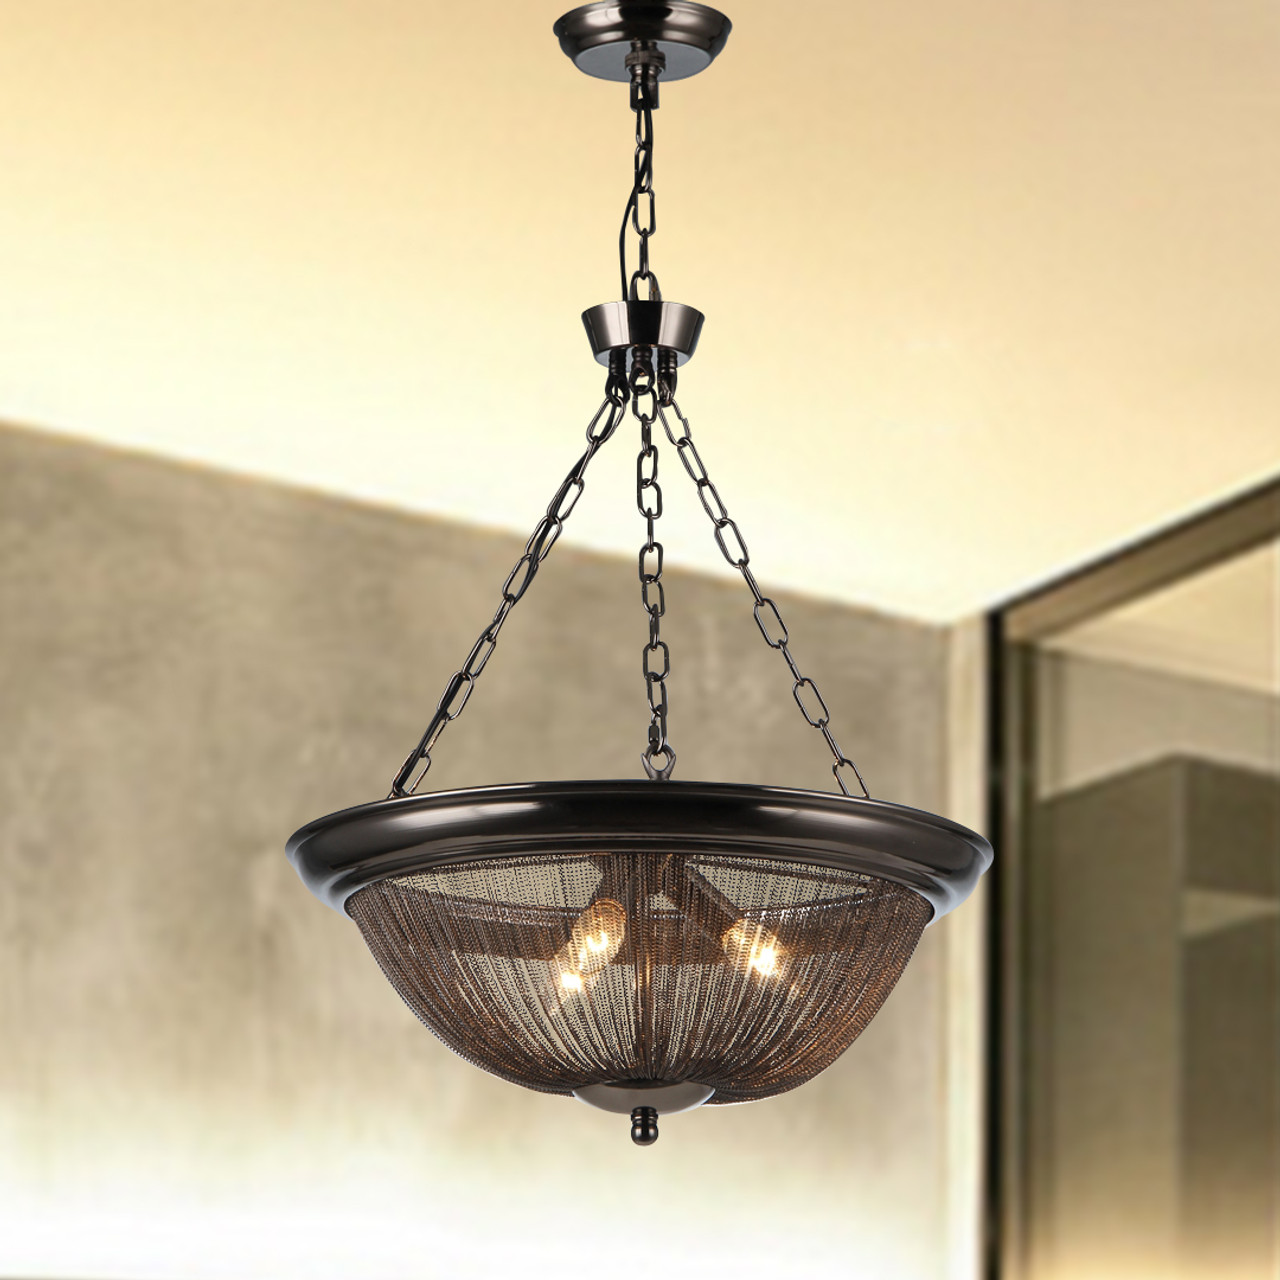 WAREHOUSE OF TIFFANY'S P1659-3 Starge 8 in. 3-Light Indoor Bronze Finish Pendant Lamp with Light Kit